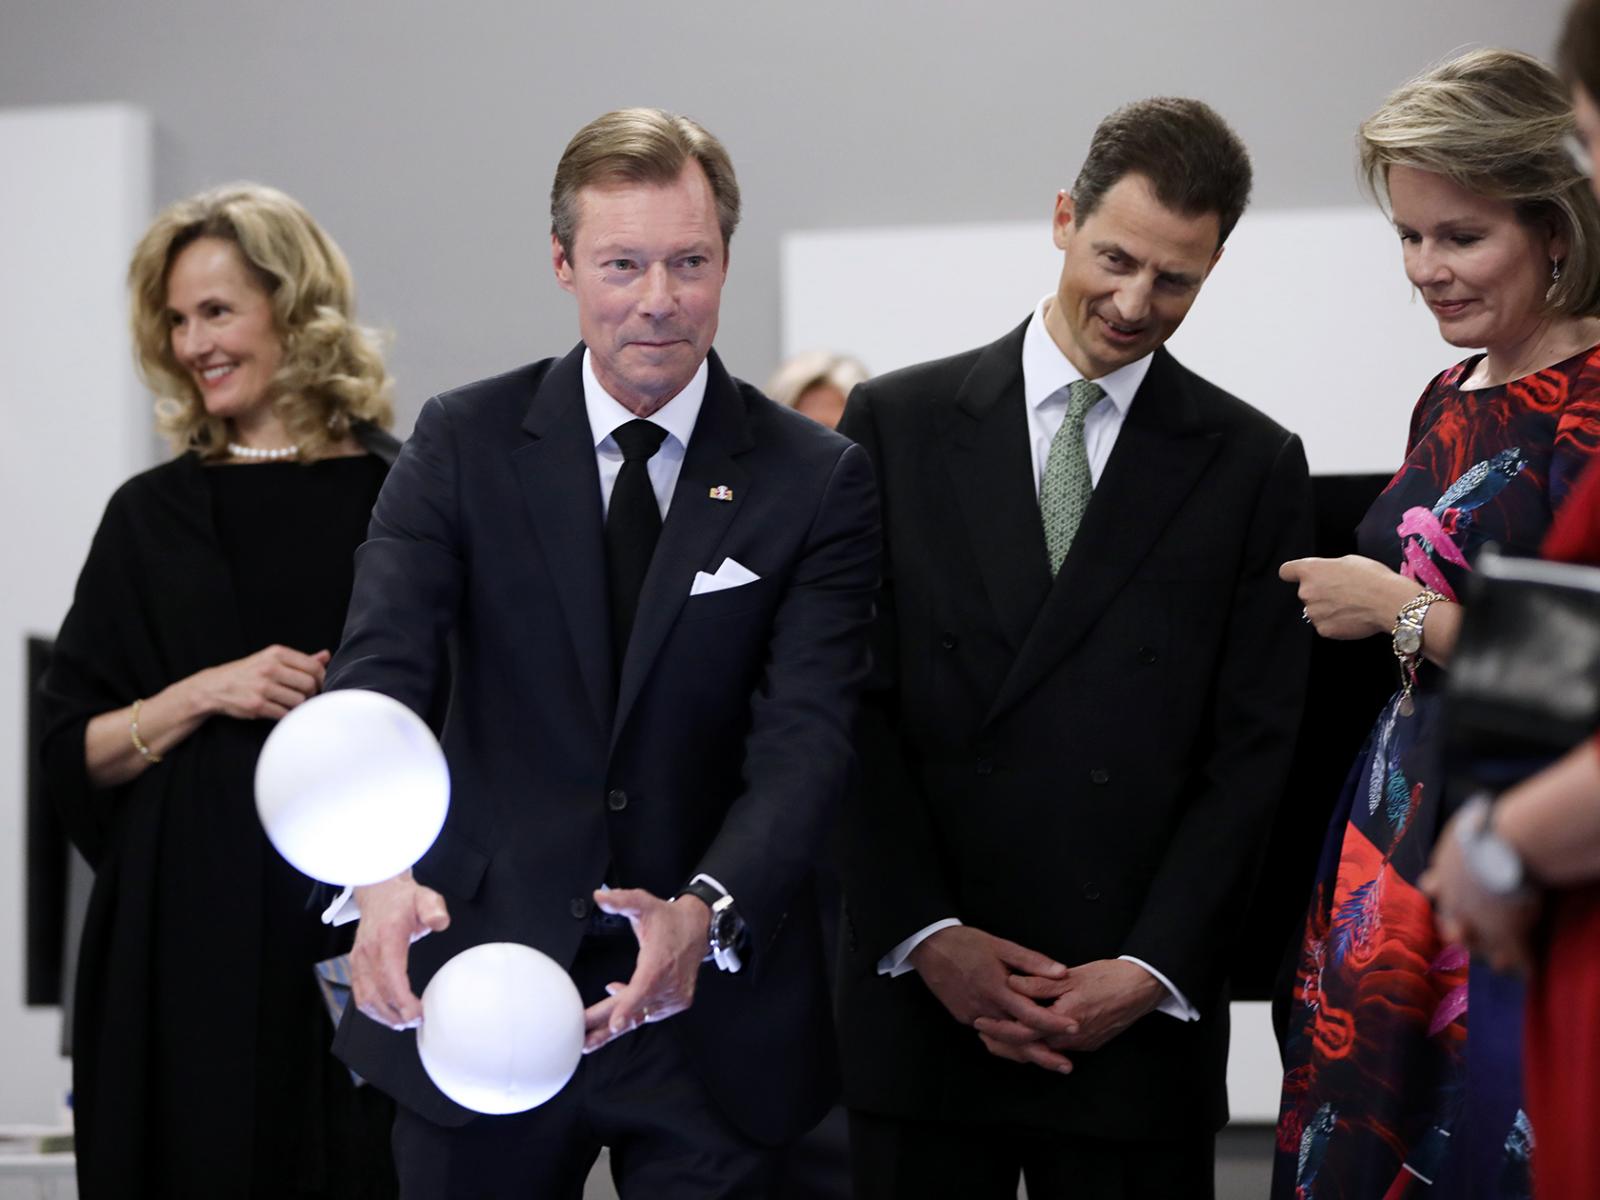 The Grand Duke visiting an exhibition